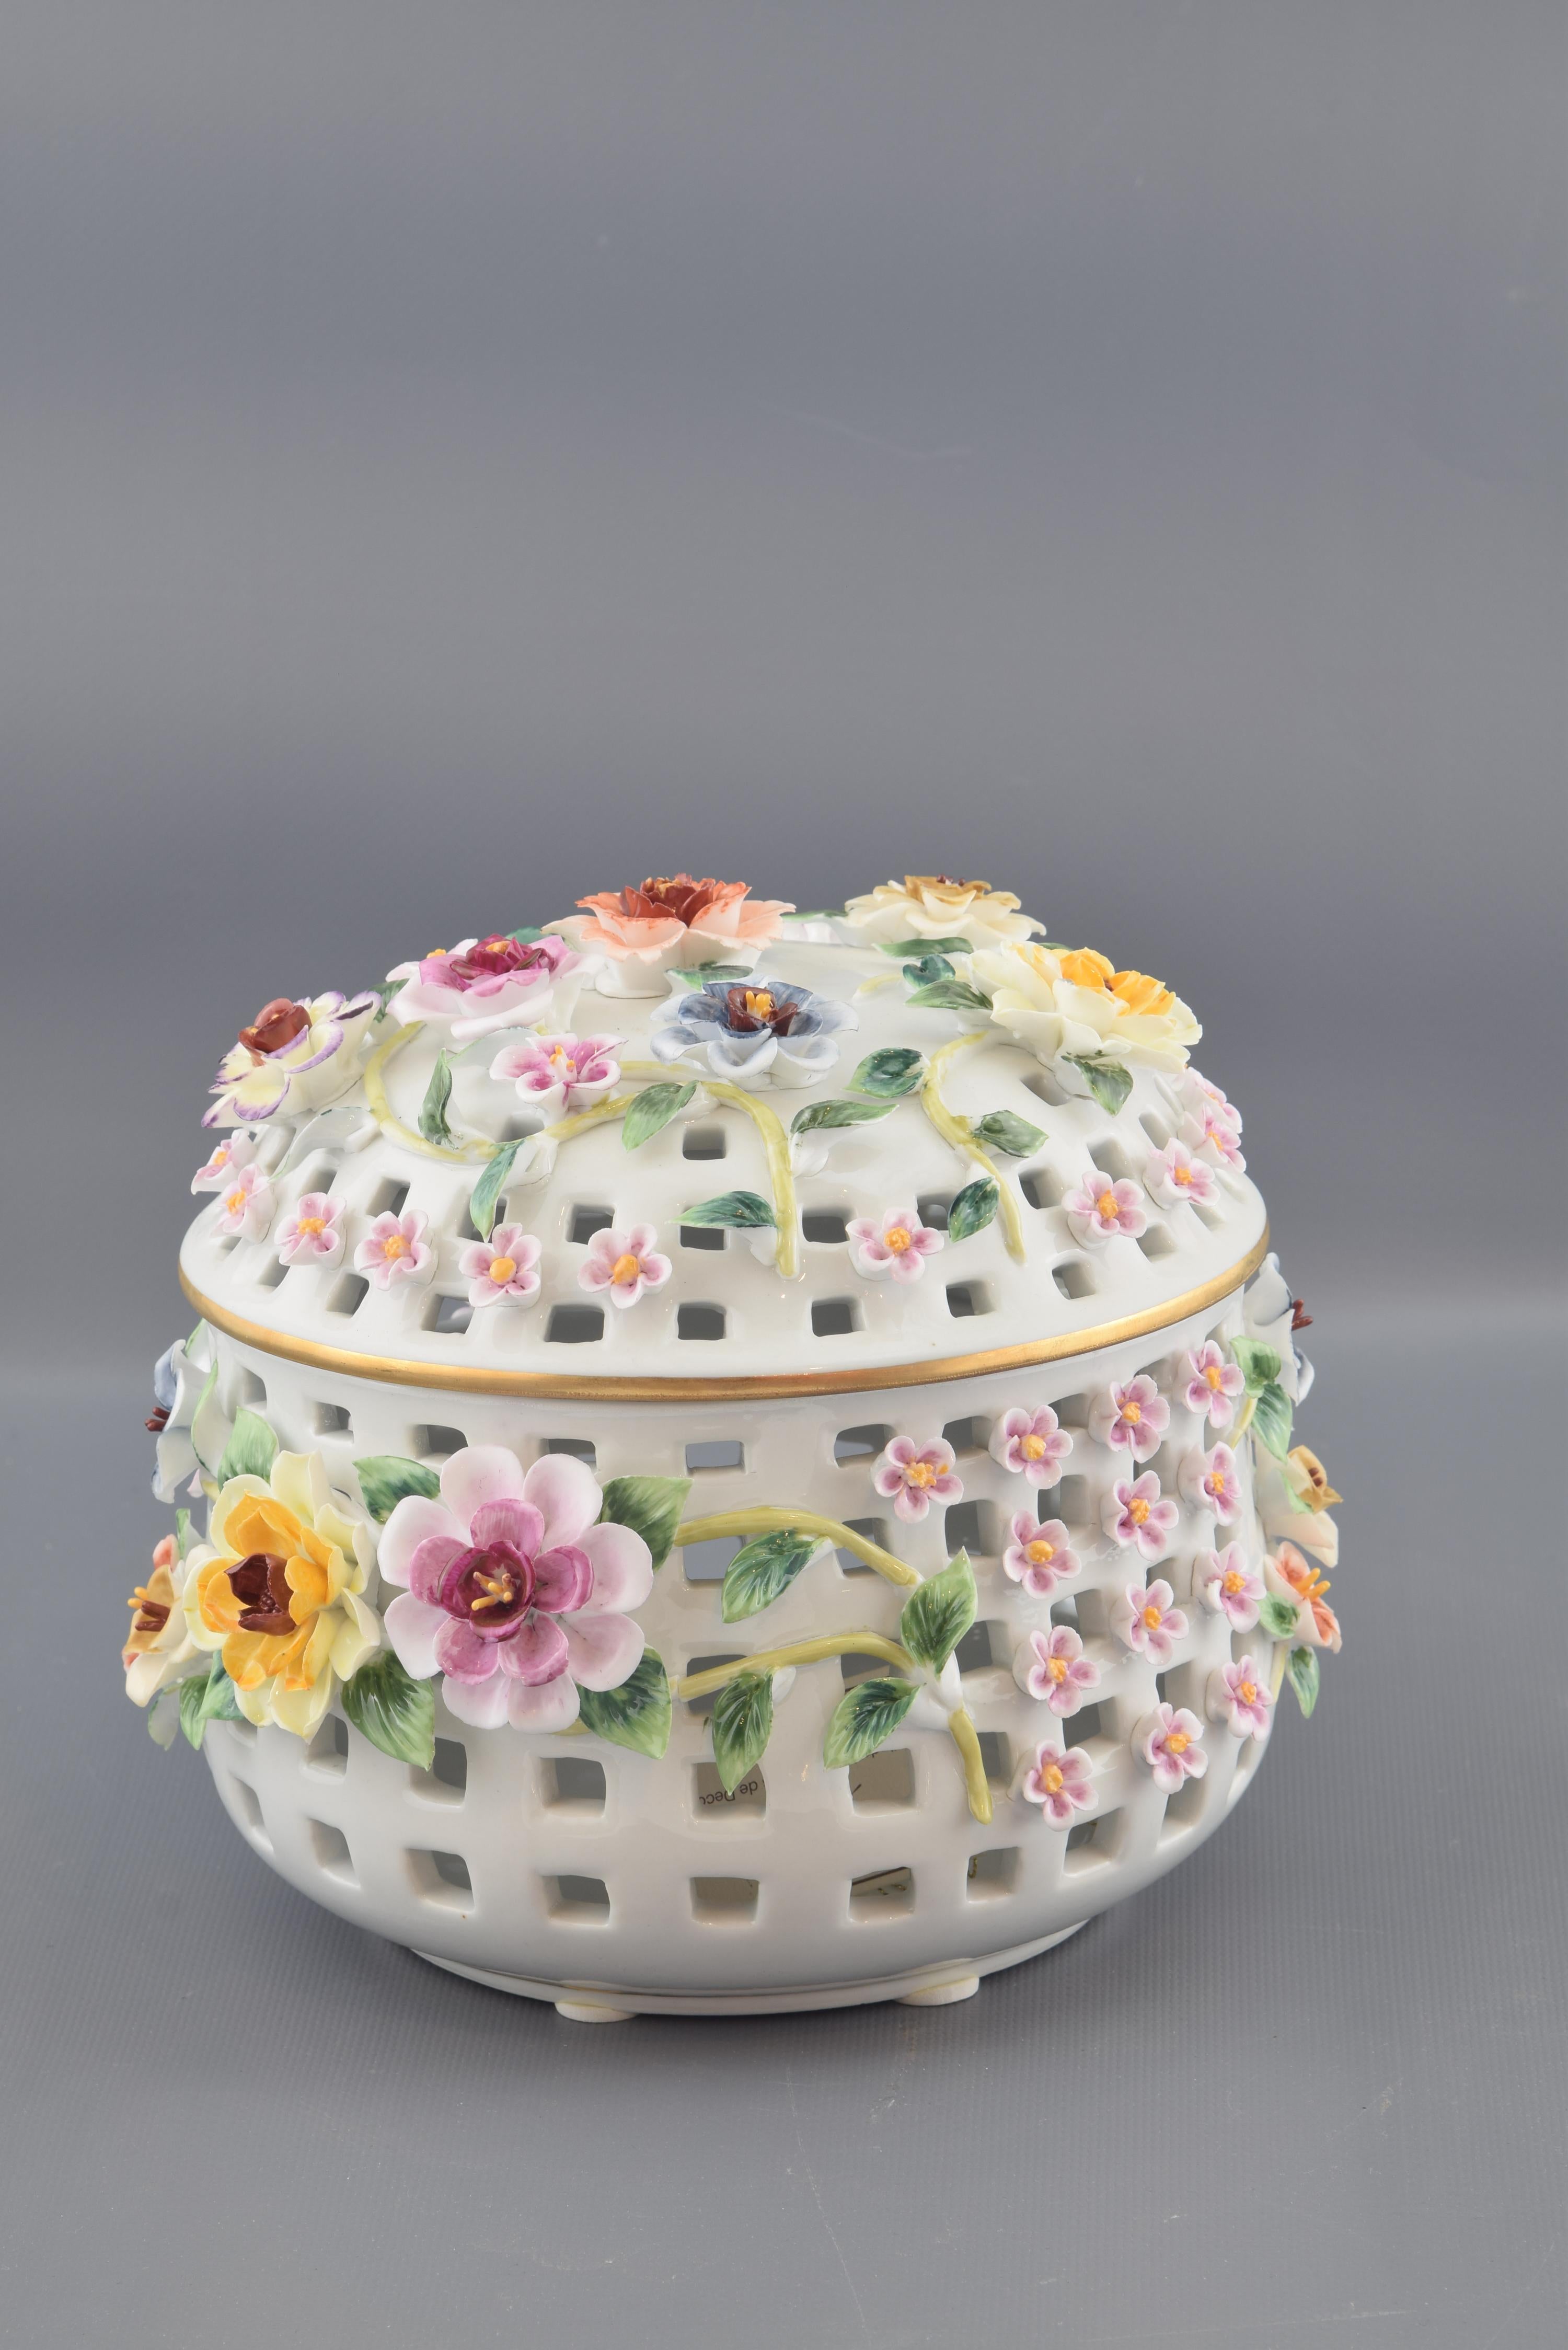 Neoclassical Porcelain Sweet Box with Flowers, after Models from Sèvres 'France'